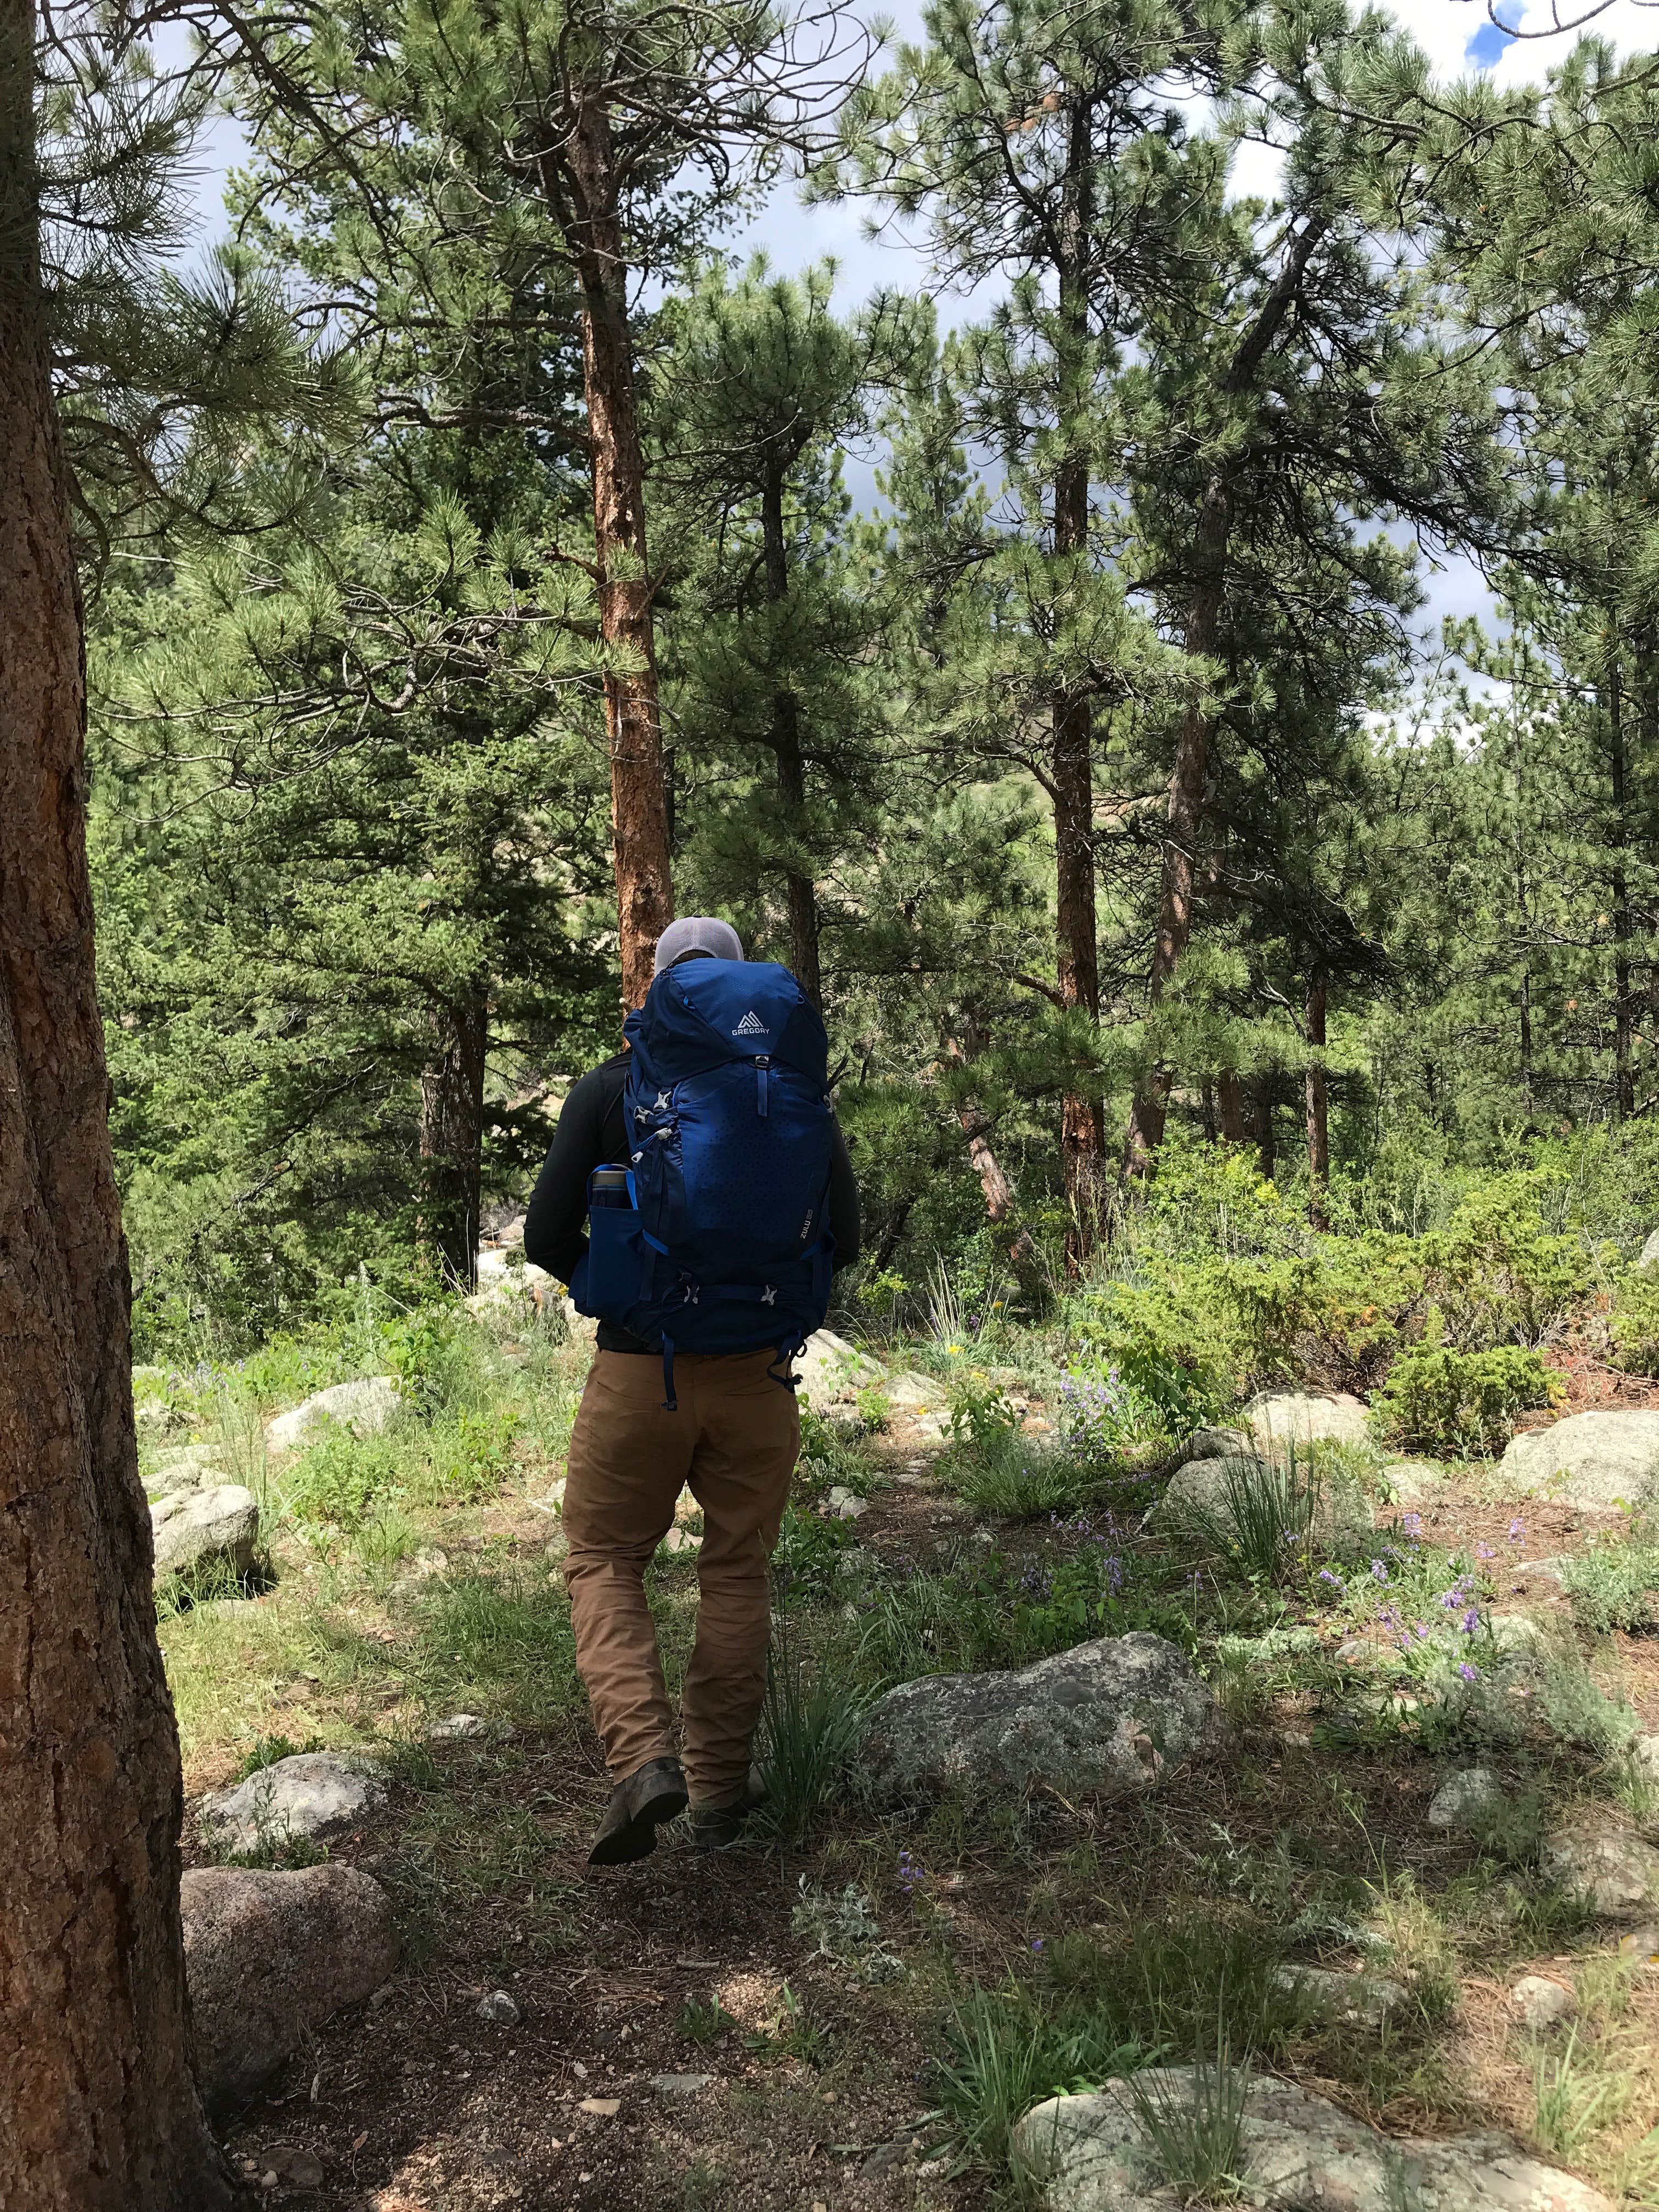 Hiking with our Gregory pack!